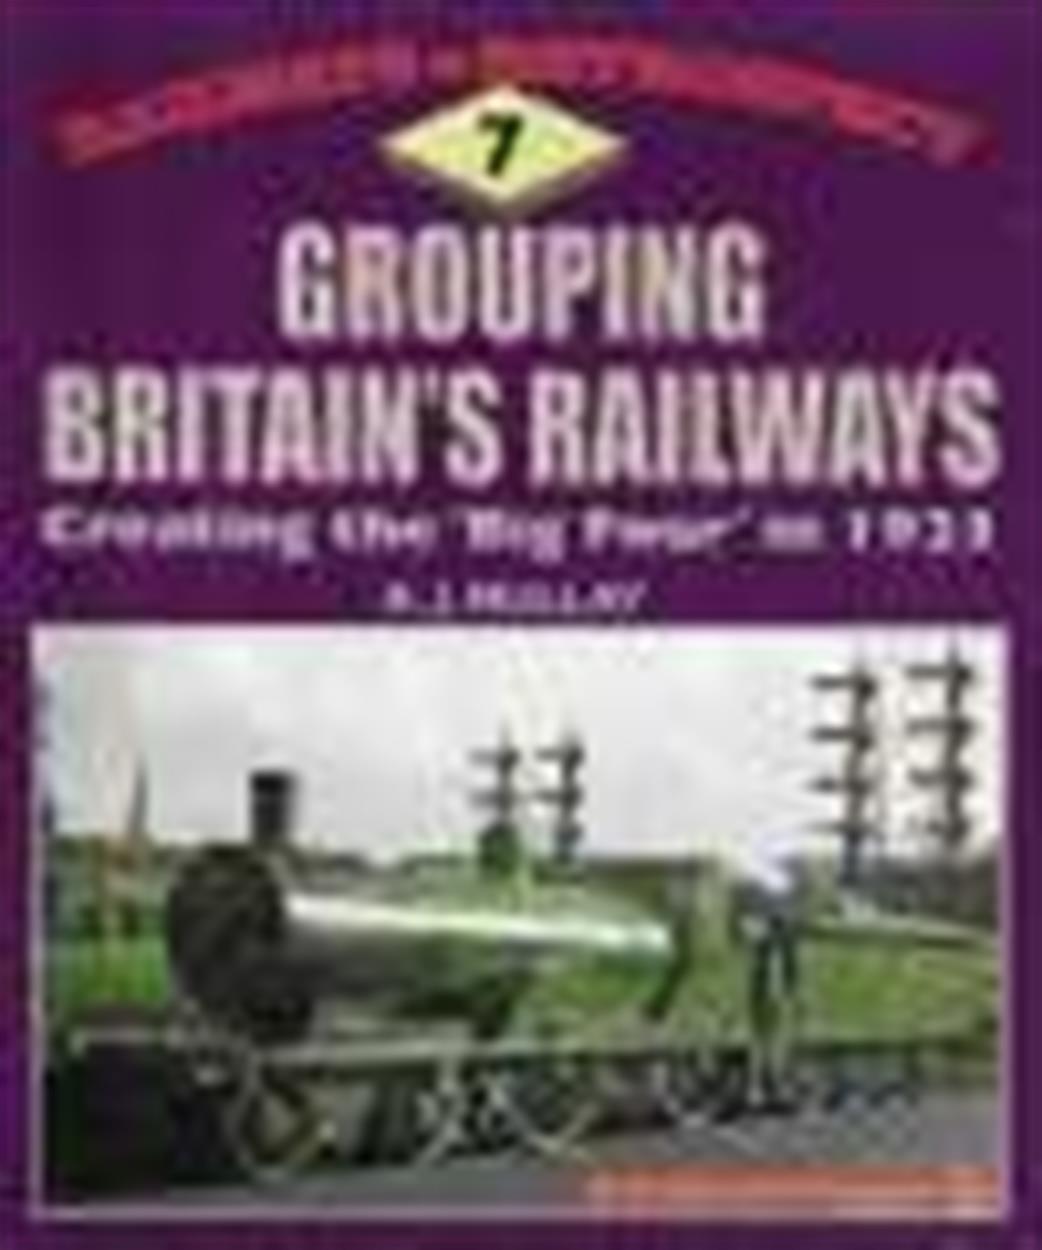 9781899816224 Grouping Britain's Railways by A J Mullay